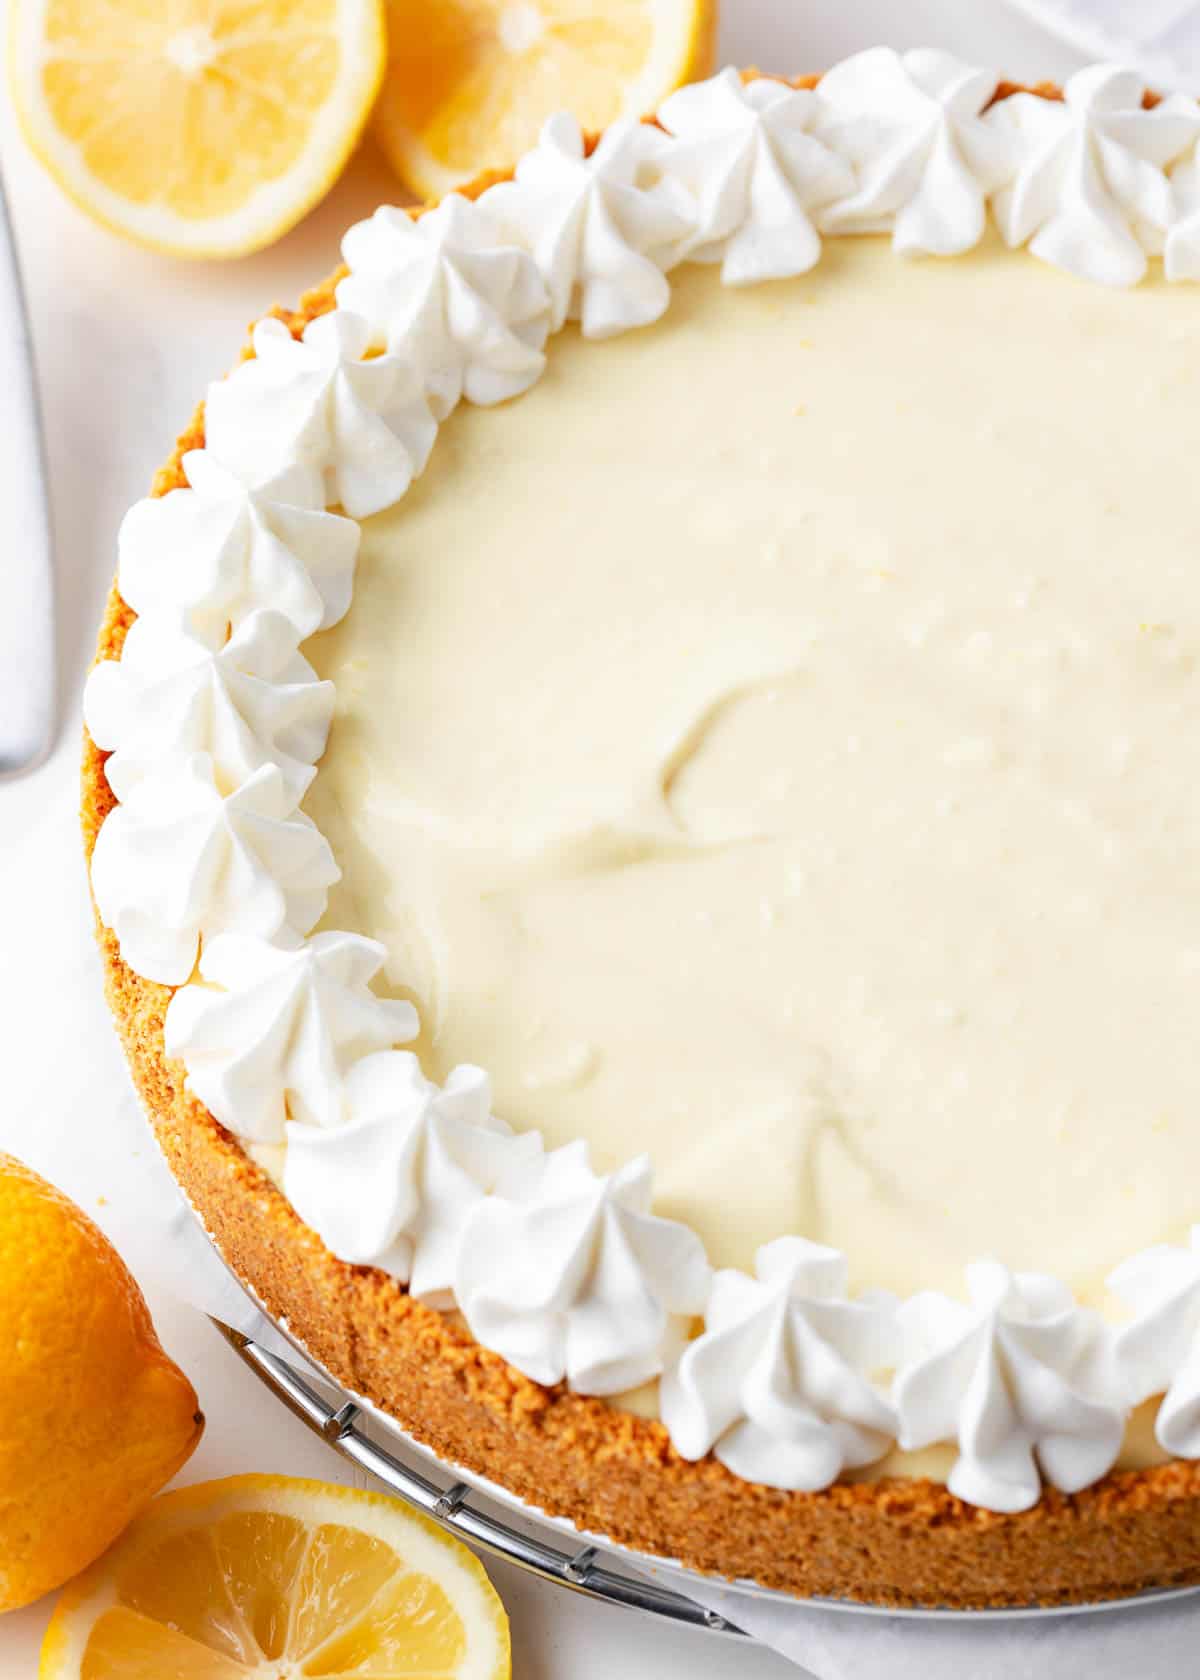 Lemon icebox pie with whipped cream on top.